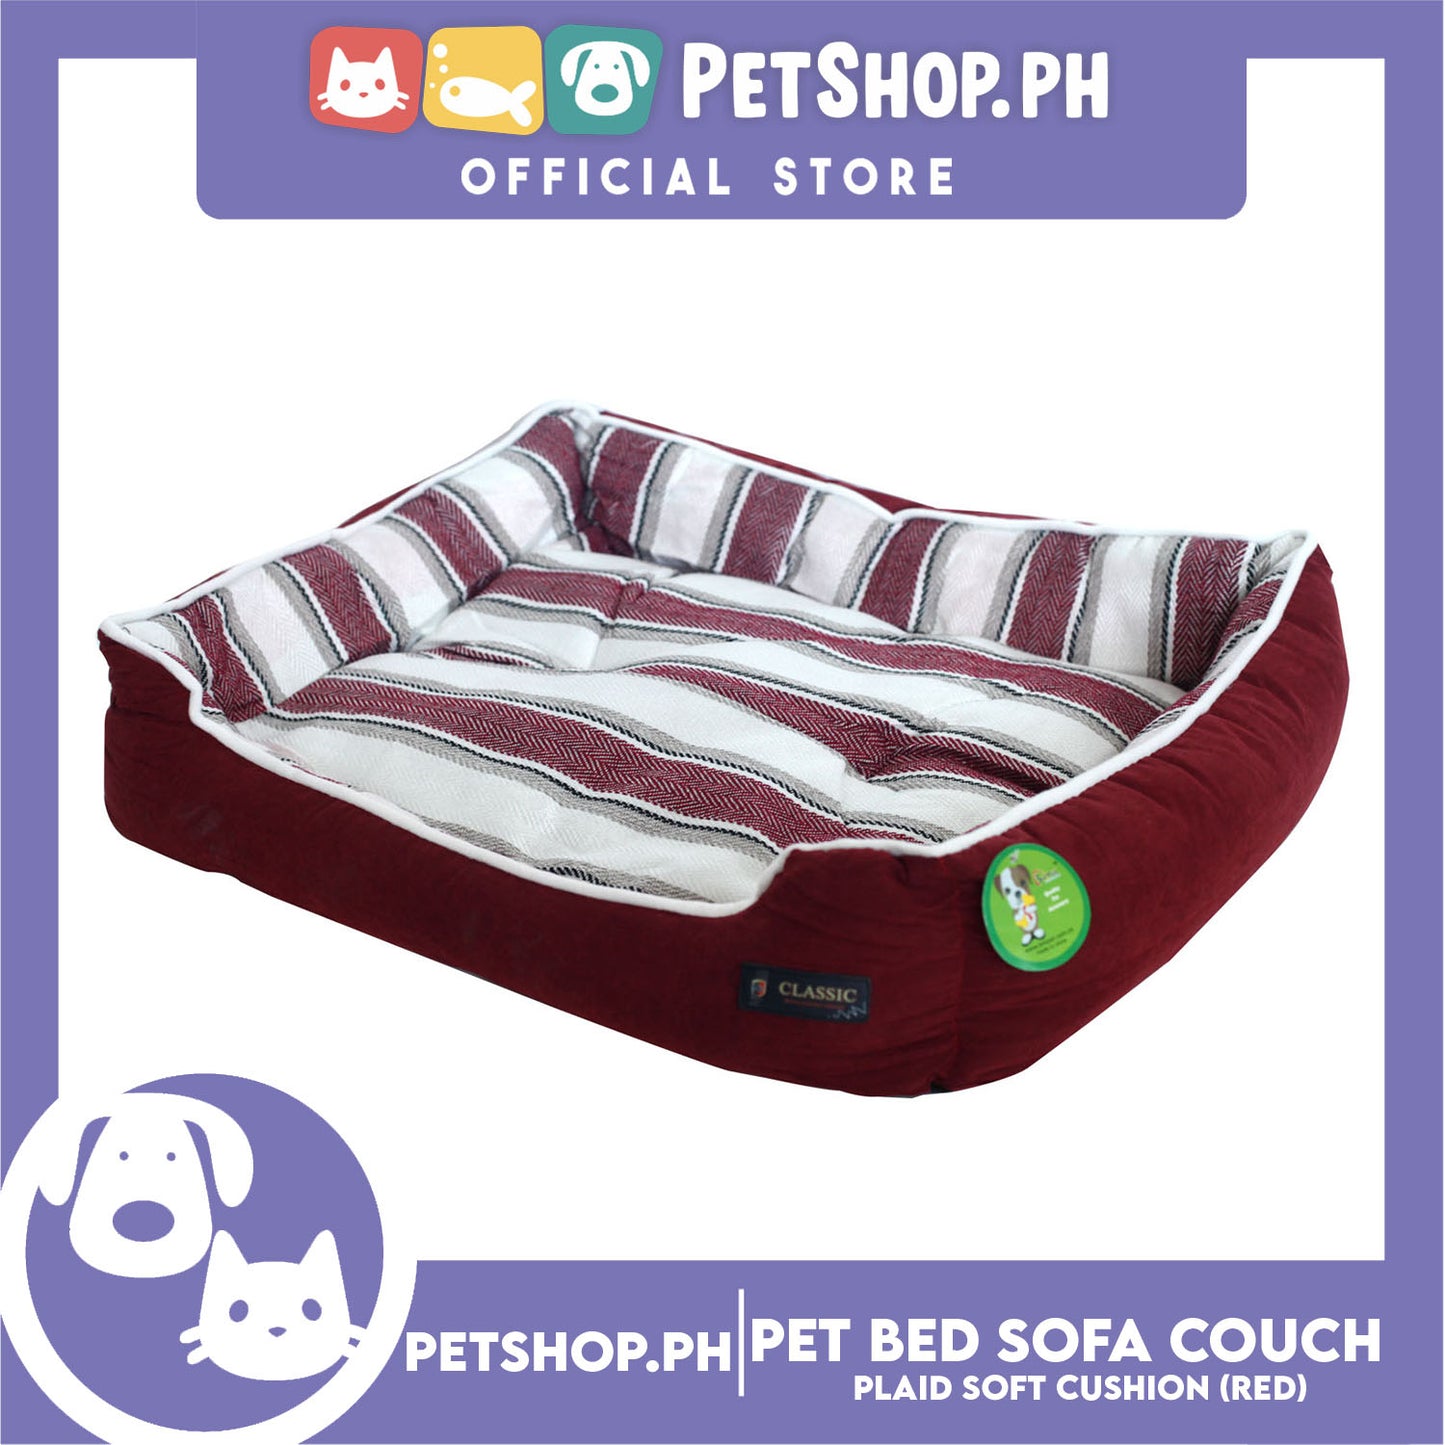 Pet Bed Sofa Couch Inner Plaid Design with Plaid Soft Cushion Small for Cats Dogs Small Breeds